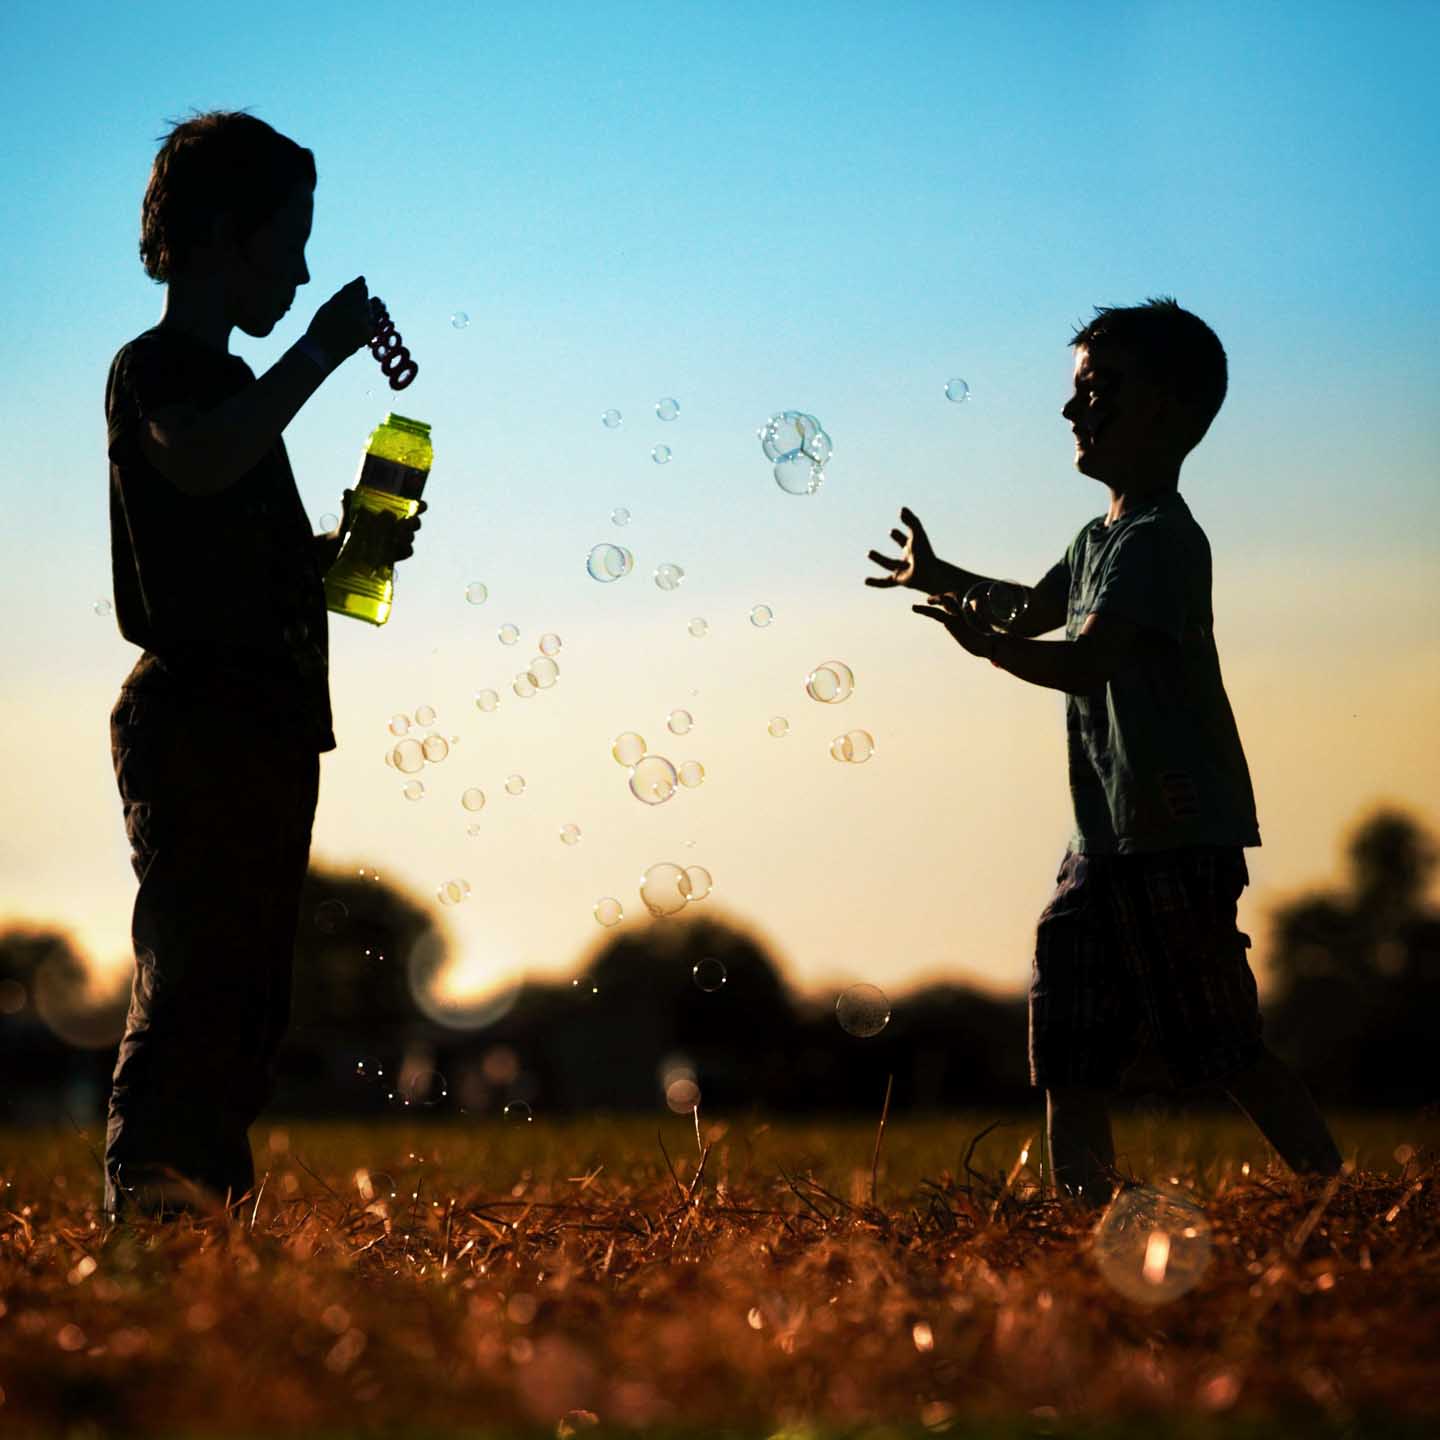 CJPOTY July 2023 shortlisted image for the Summer theme - blowing bubbles at sunset